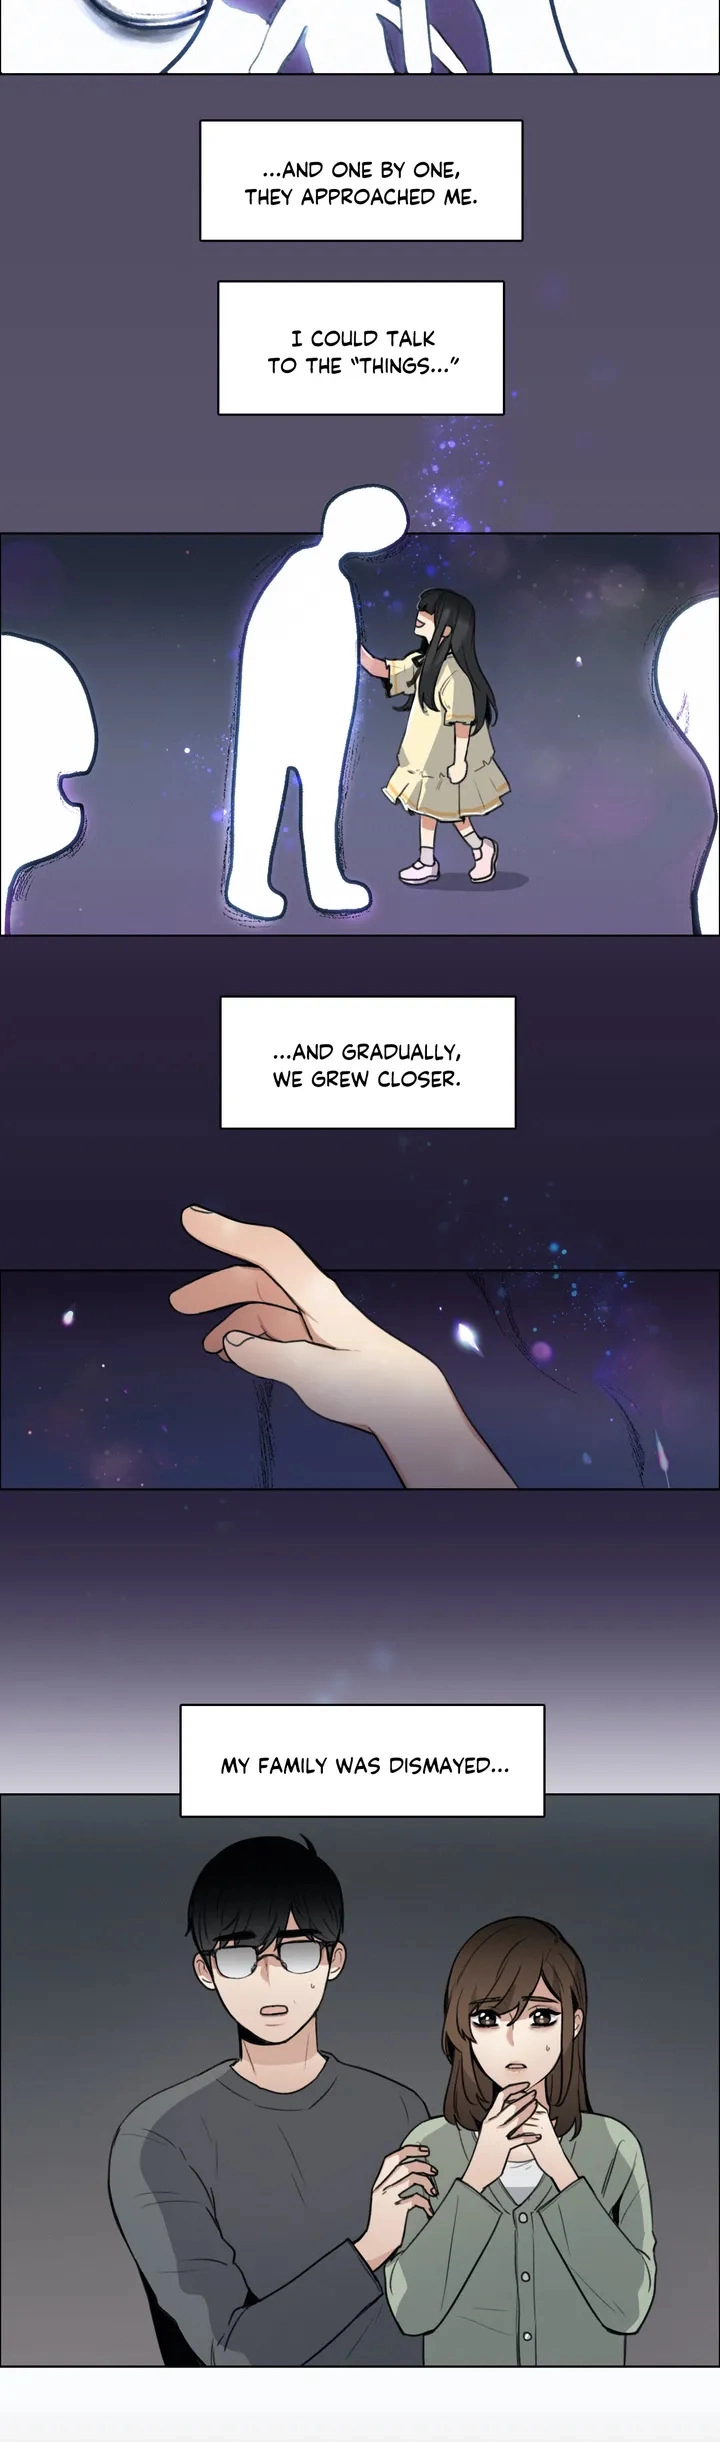 Polar Attraction - Chapter 0 Page 2